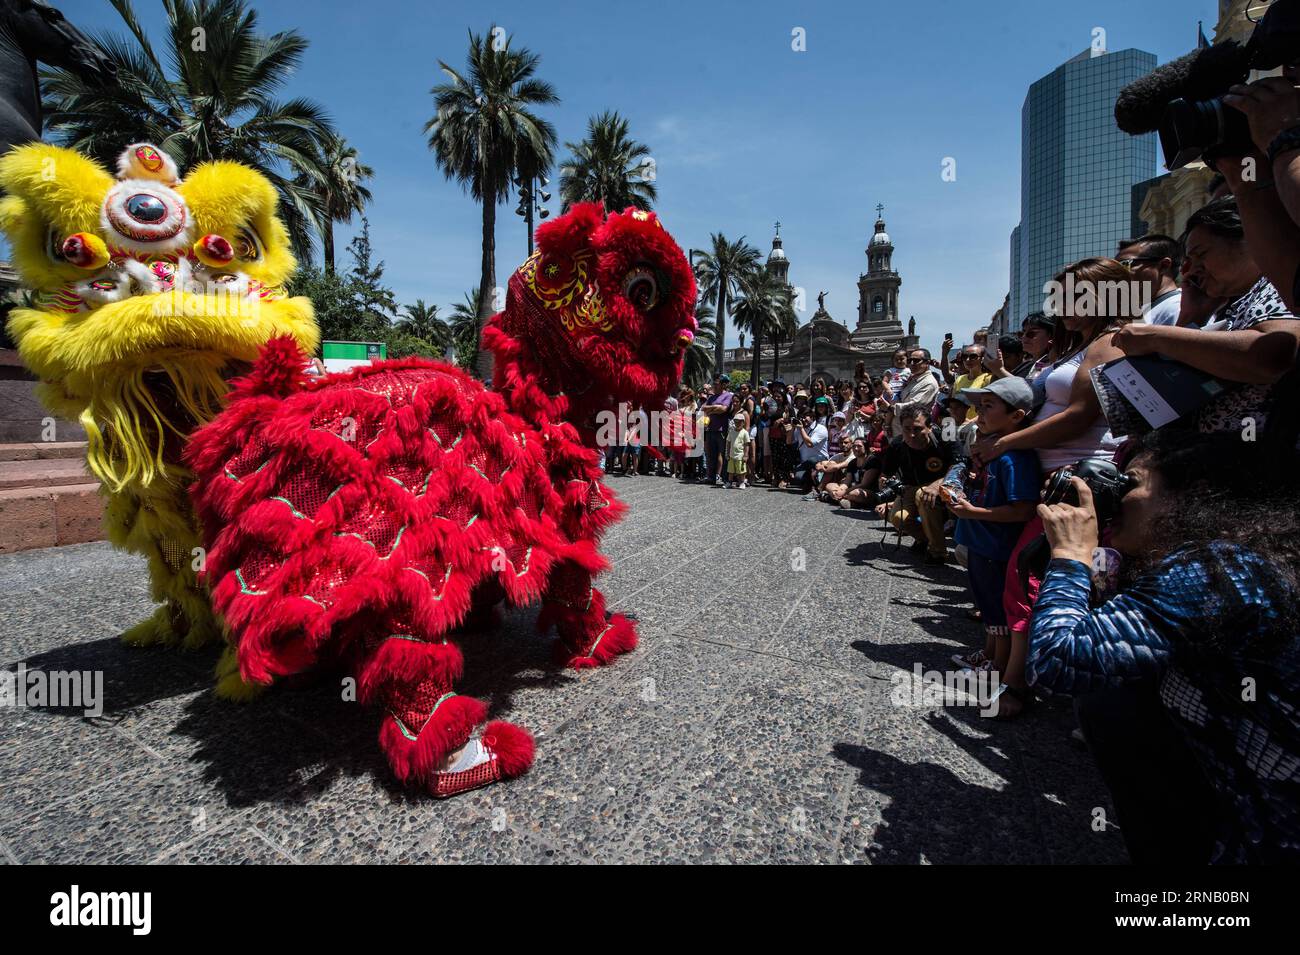 Dancers perform Lion Dance during the Chinese Lunar New Year and Feast of Santiago celebrations, at the Plaza de Armas in Santiago, capital of Chile, on Feb. 12, 2016. Feast of Santiago celebrates the 475th anniversary of the founding of the Chilean capital of Santiago by Pedro de Valdivia. Jorge Villegas) (jg) (fnc) CHILE-SANTIAGO-CHINA-LUNAR NEW YEAR e JORGExVILLEGAS PUBLICATIONxNOTxINxCHN   Dancers perform Lion Dance during The Chinese Lunar New Year and Feast of Santiago celebrations AT The Plaza de Armas in Santiago Capital of Chile ON Feb 12 2016 Feast of Santiago celebrates The 475th An Stock Photo